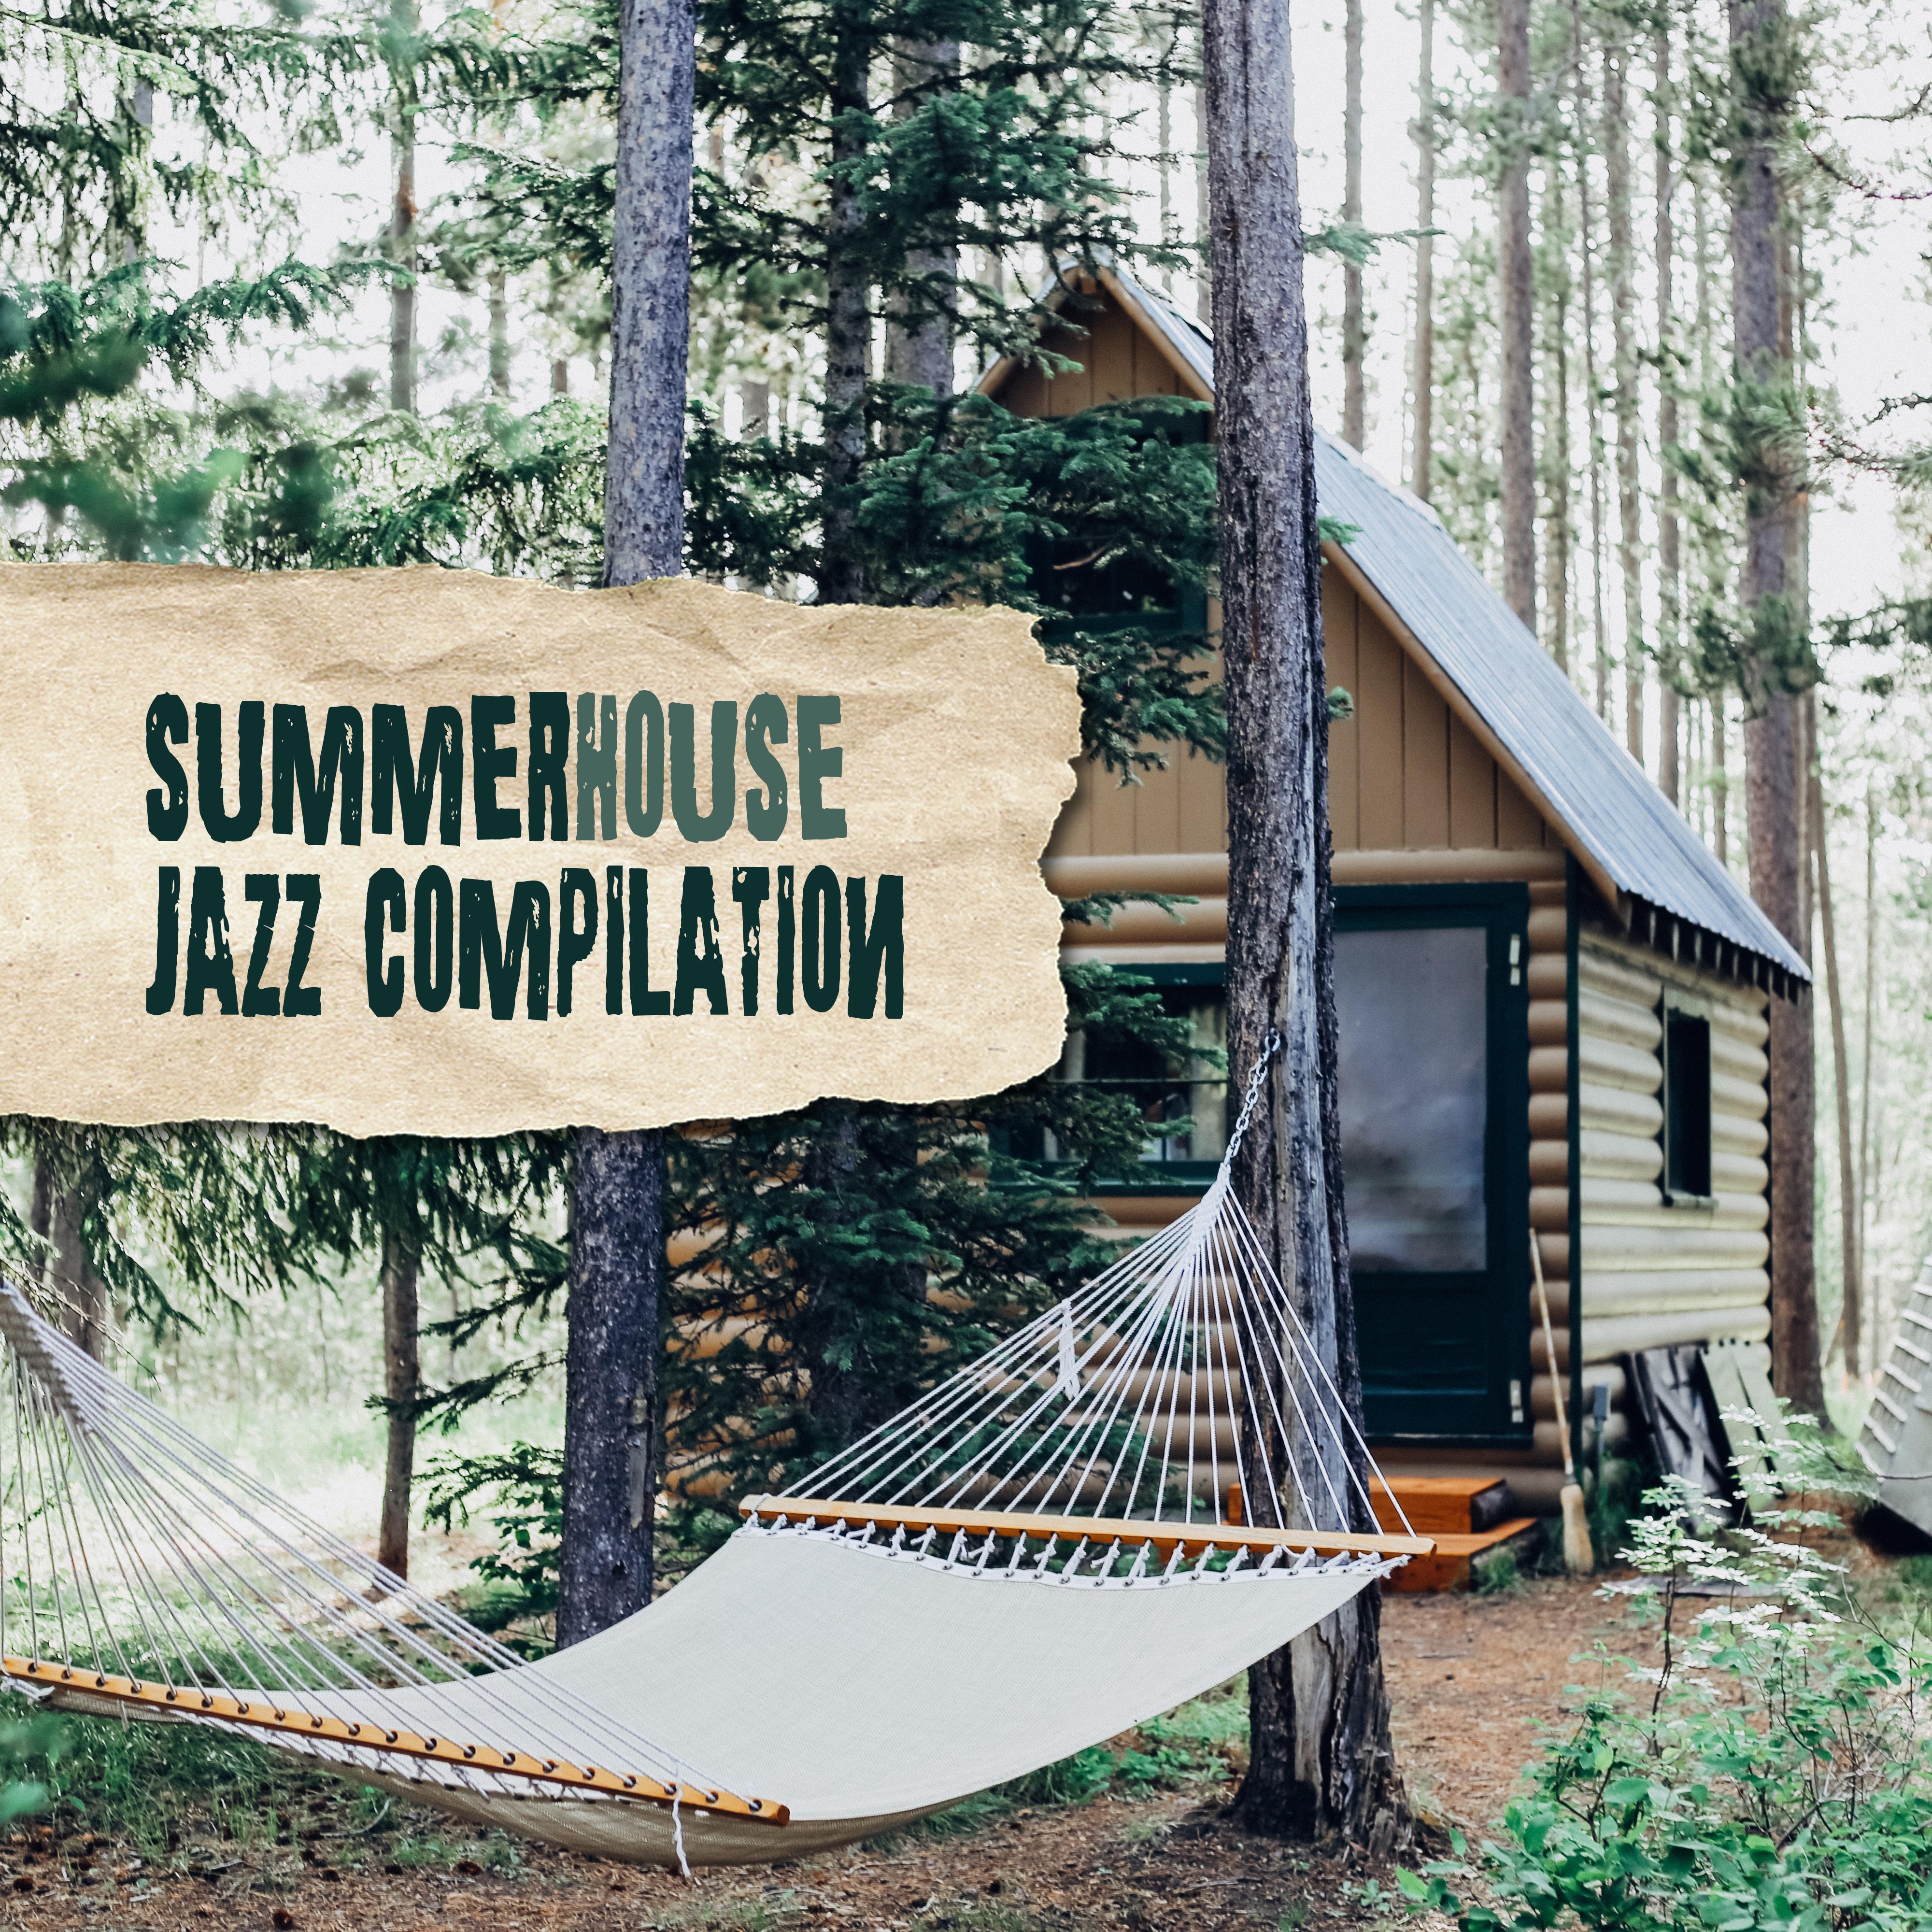 Summerhouse Jazz Compilation: 15 Jazz Tracks in a Summer Mood for the duration of Holidays, Rest and Relaxation in a Summerhouse